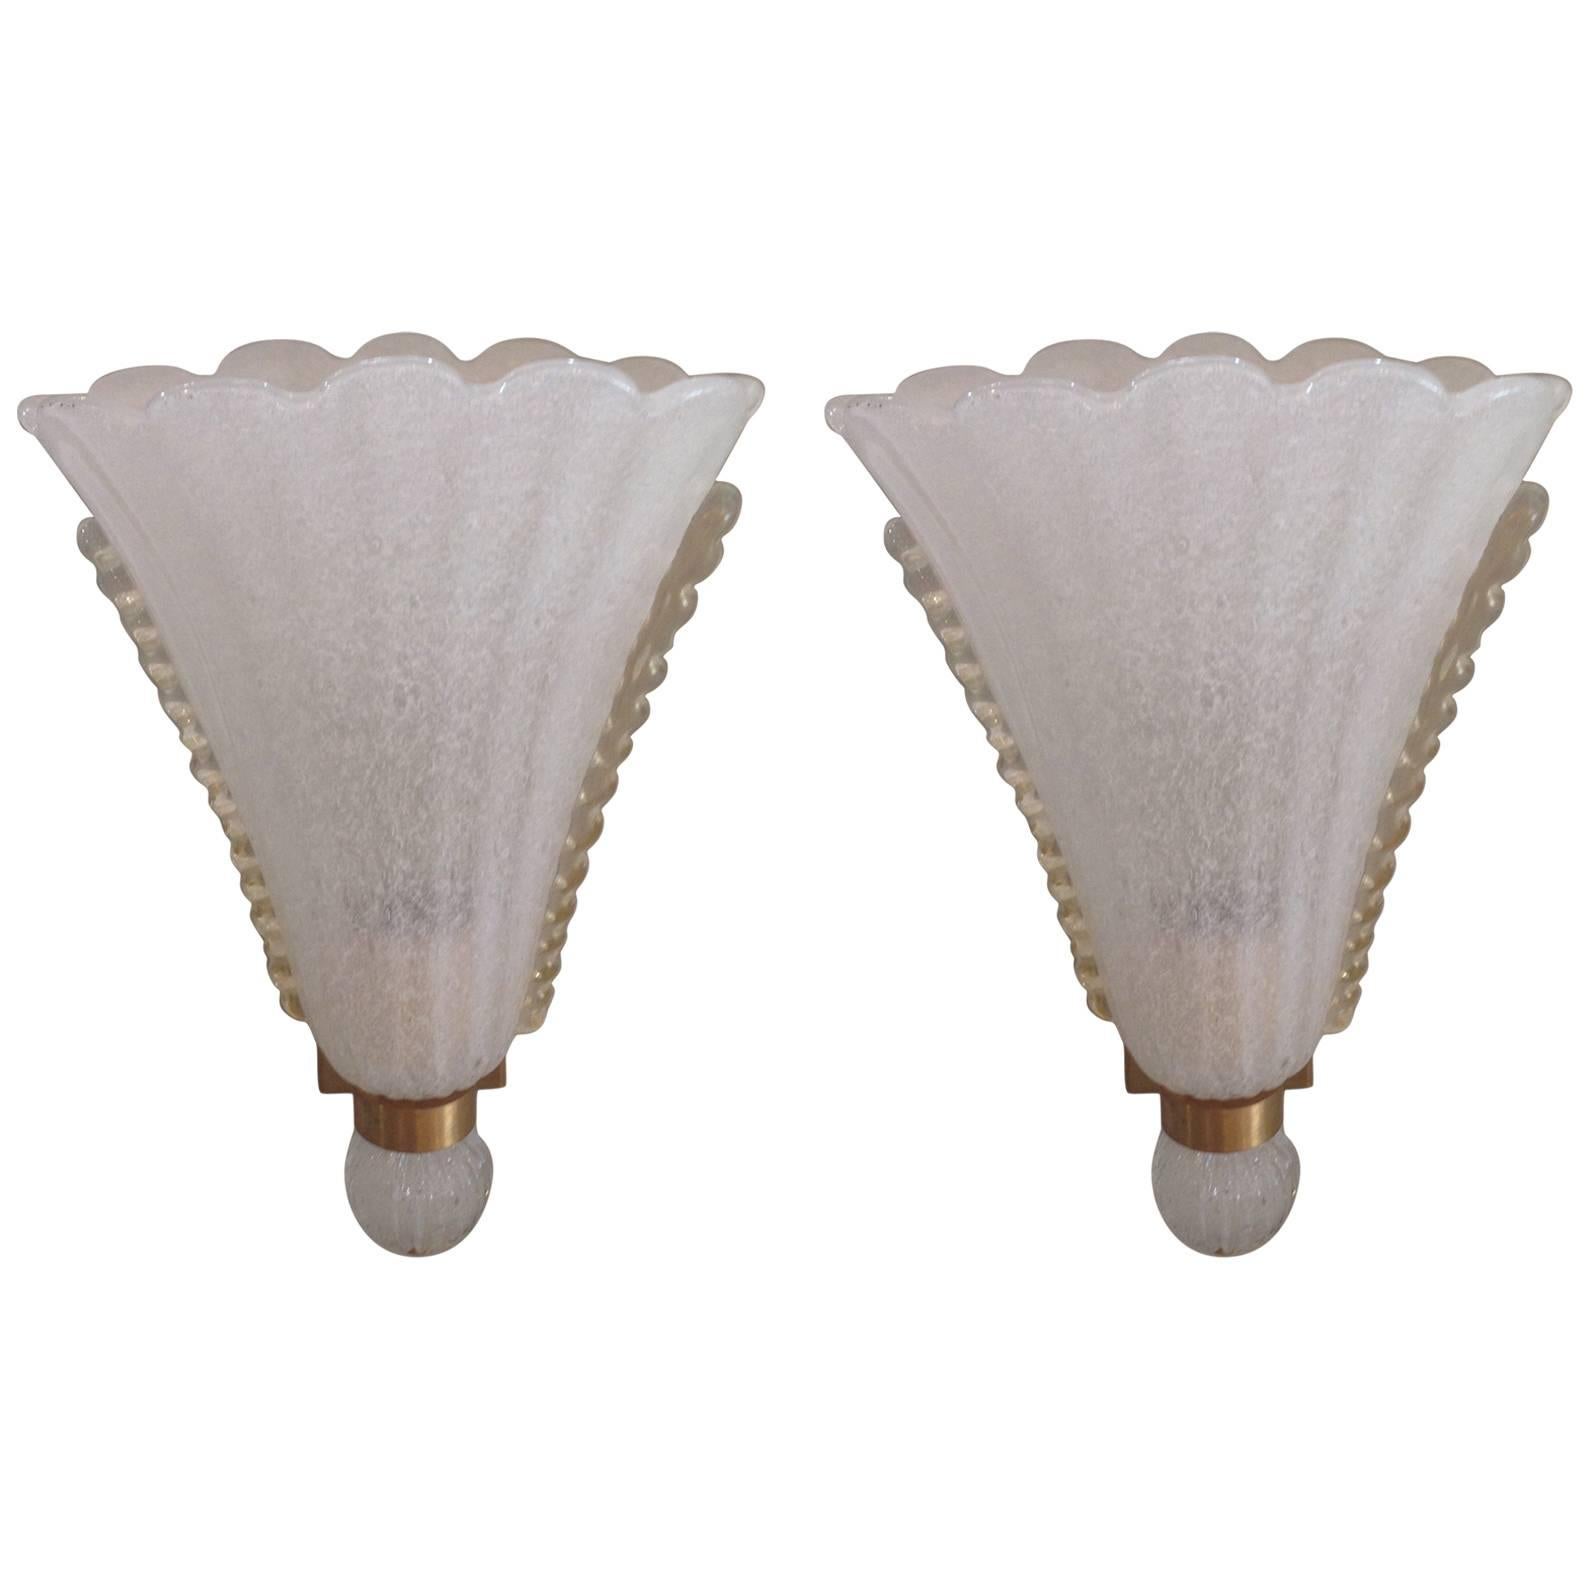 Pair of Barovier Sconces, 1940s For Sale